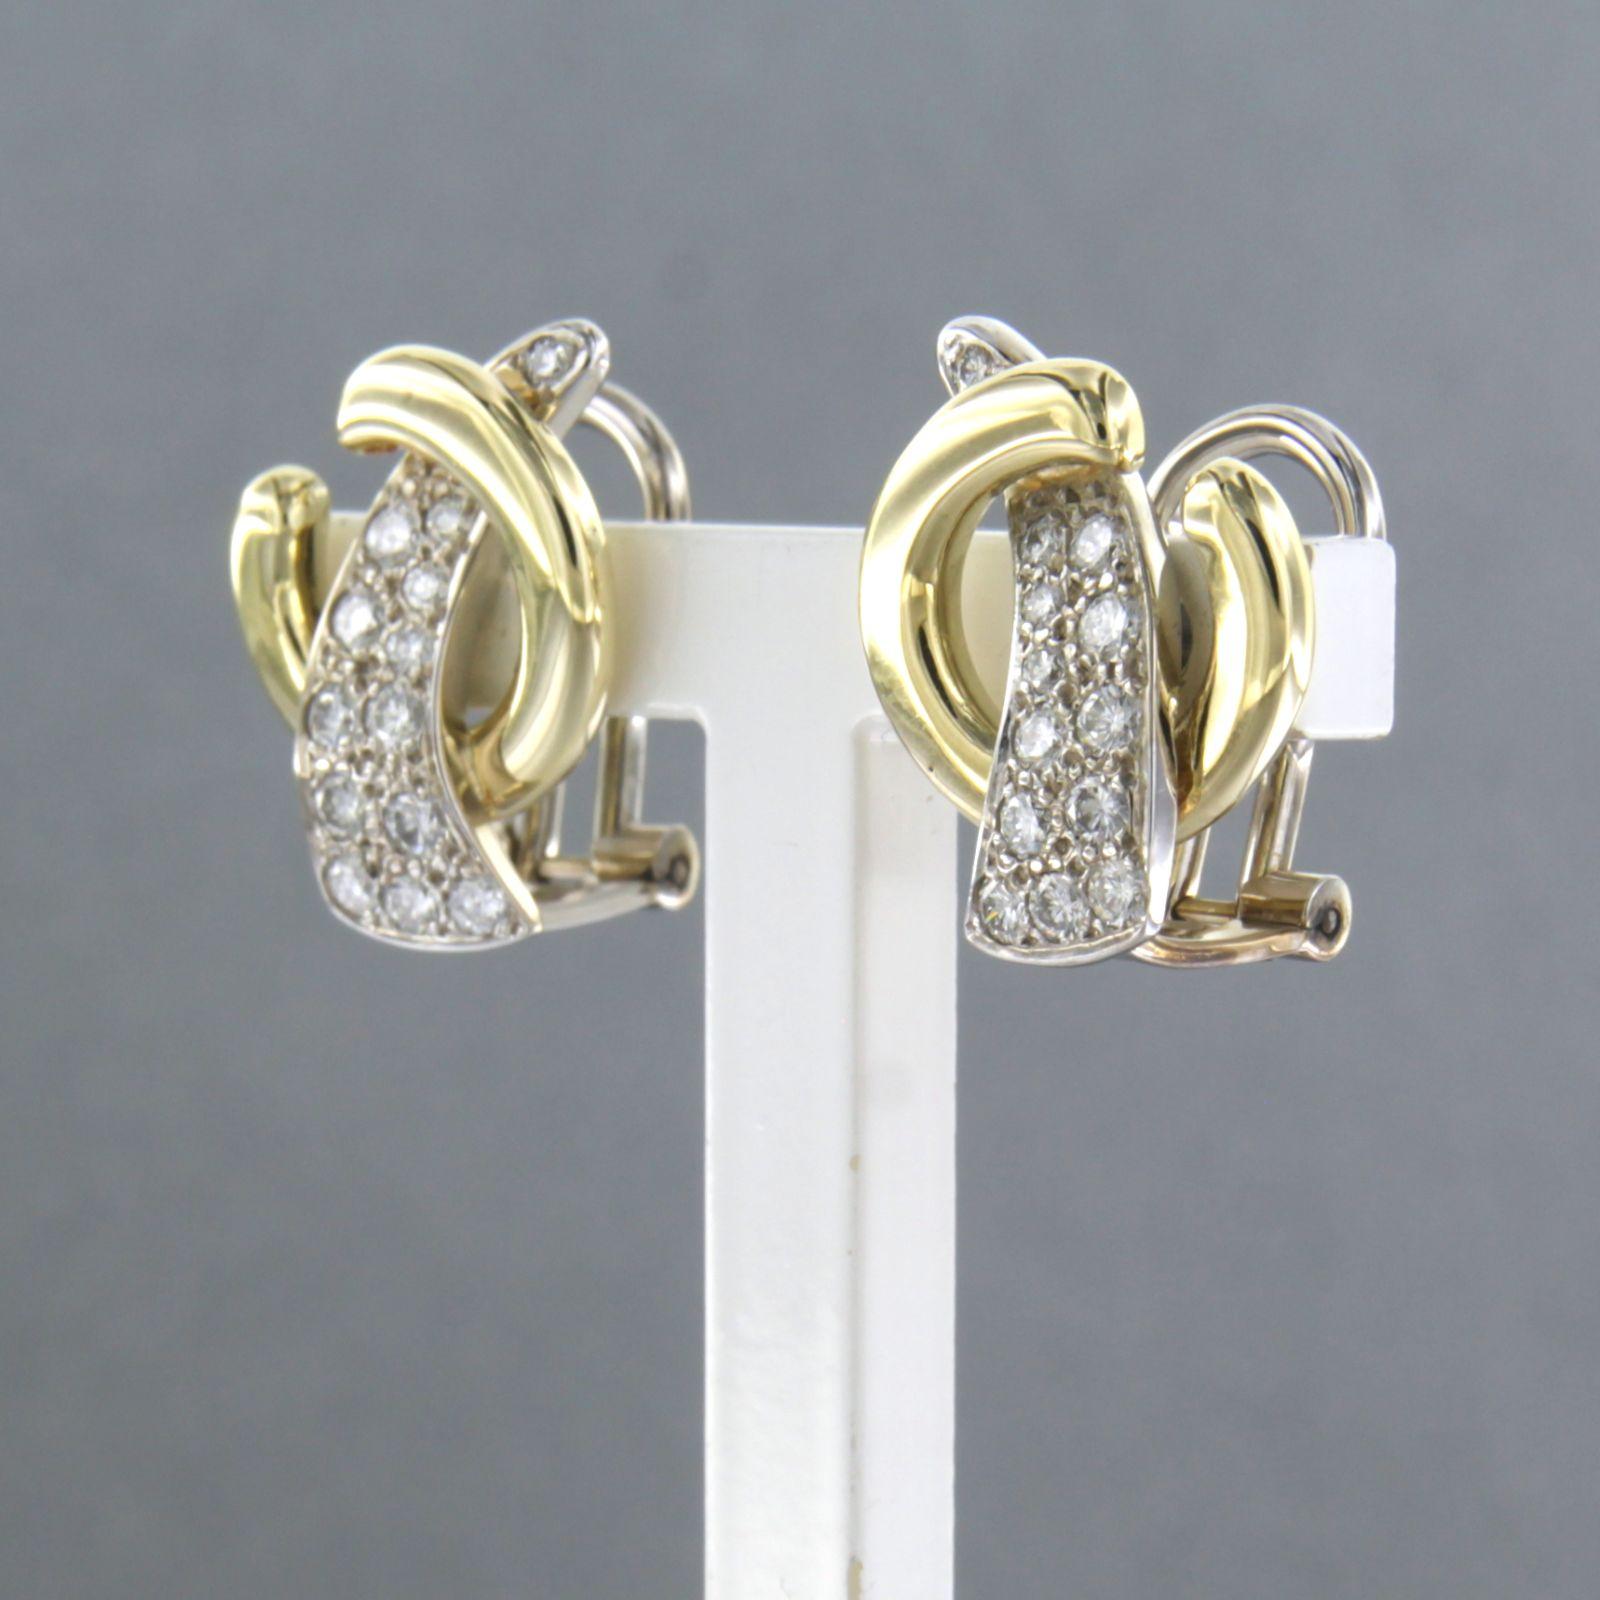 14k bicolor gold ear clips with brilliant cut diamond 0.60 ct G/H VS/SI

Detailed description

the top of the ear clips is 1.6 cm high and 1.2 cm wide

Total weight: 6.4 grams

occupied with:

- 26 x 1.8 mm brilliant cut diamond, up to. 0.60